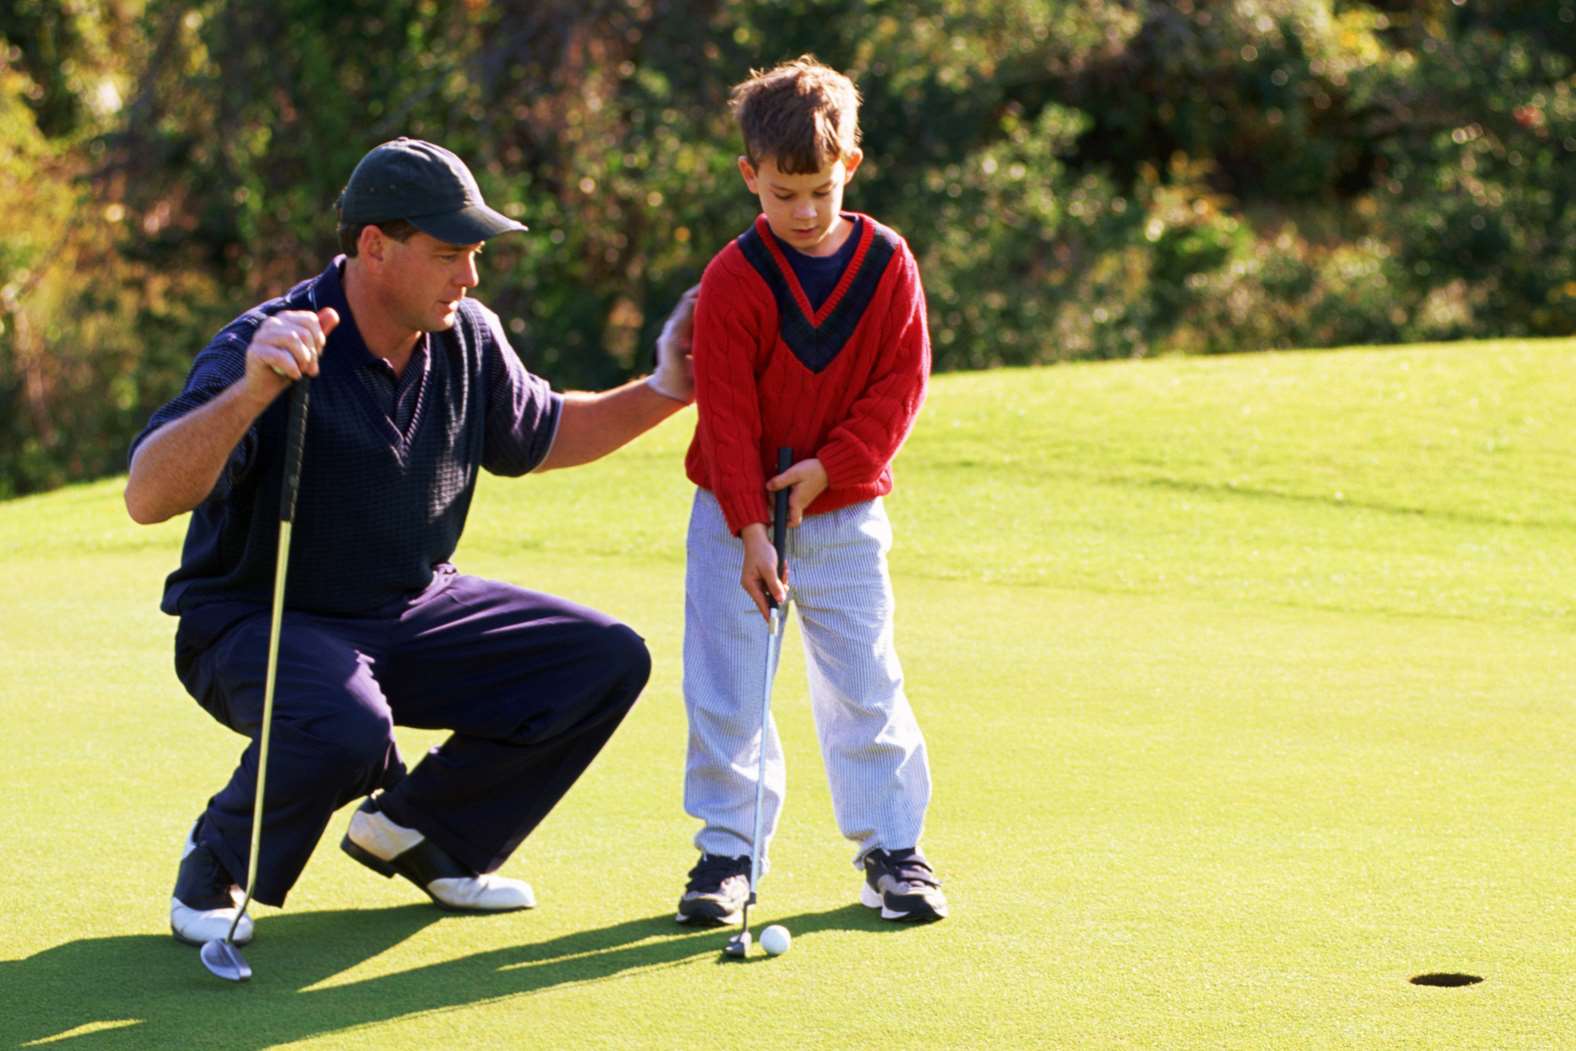 Enjoy a round of golf with the kids